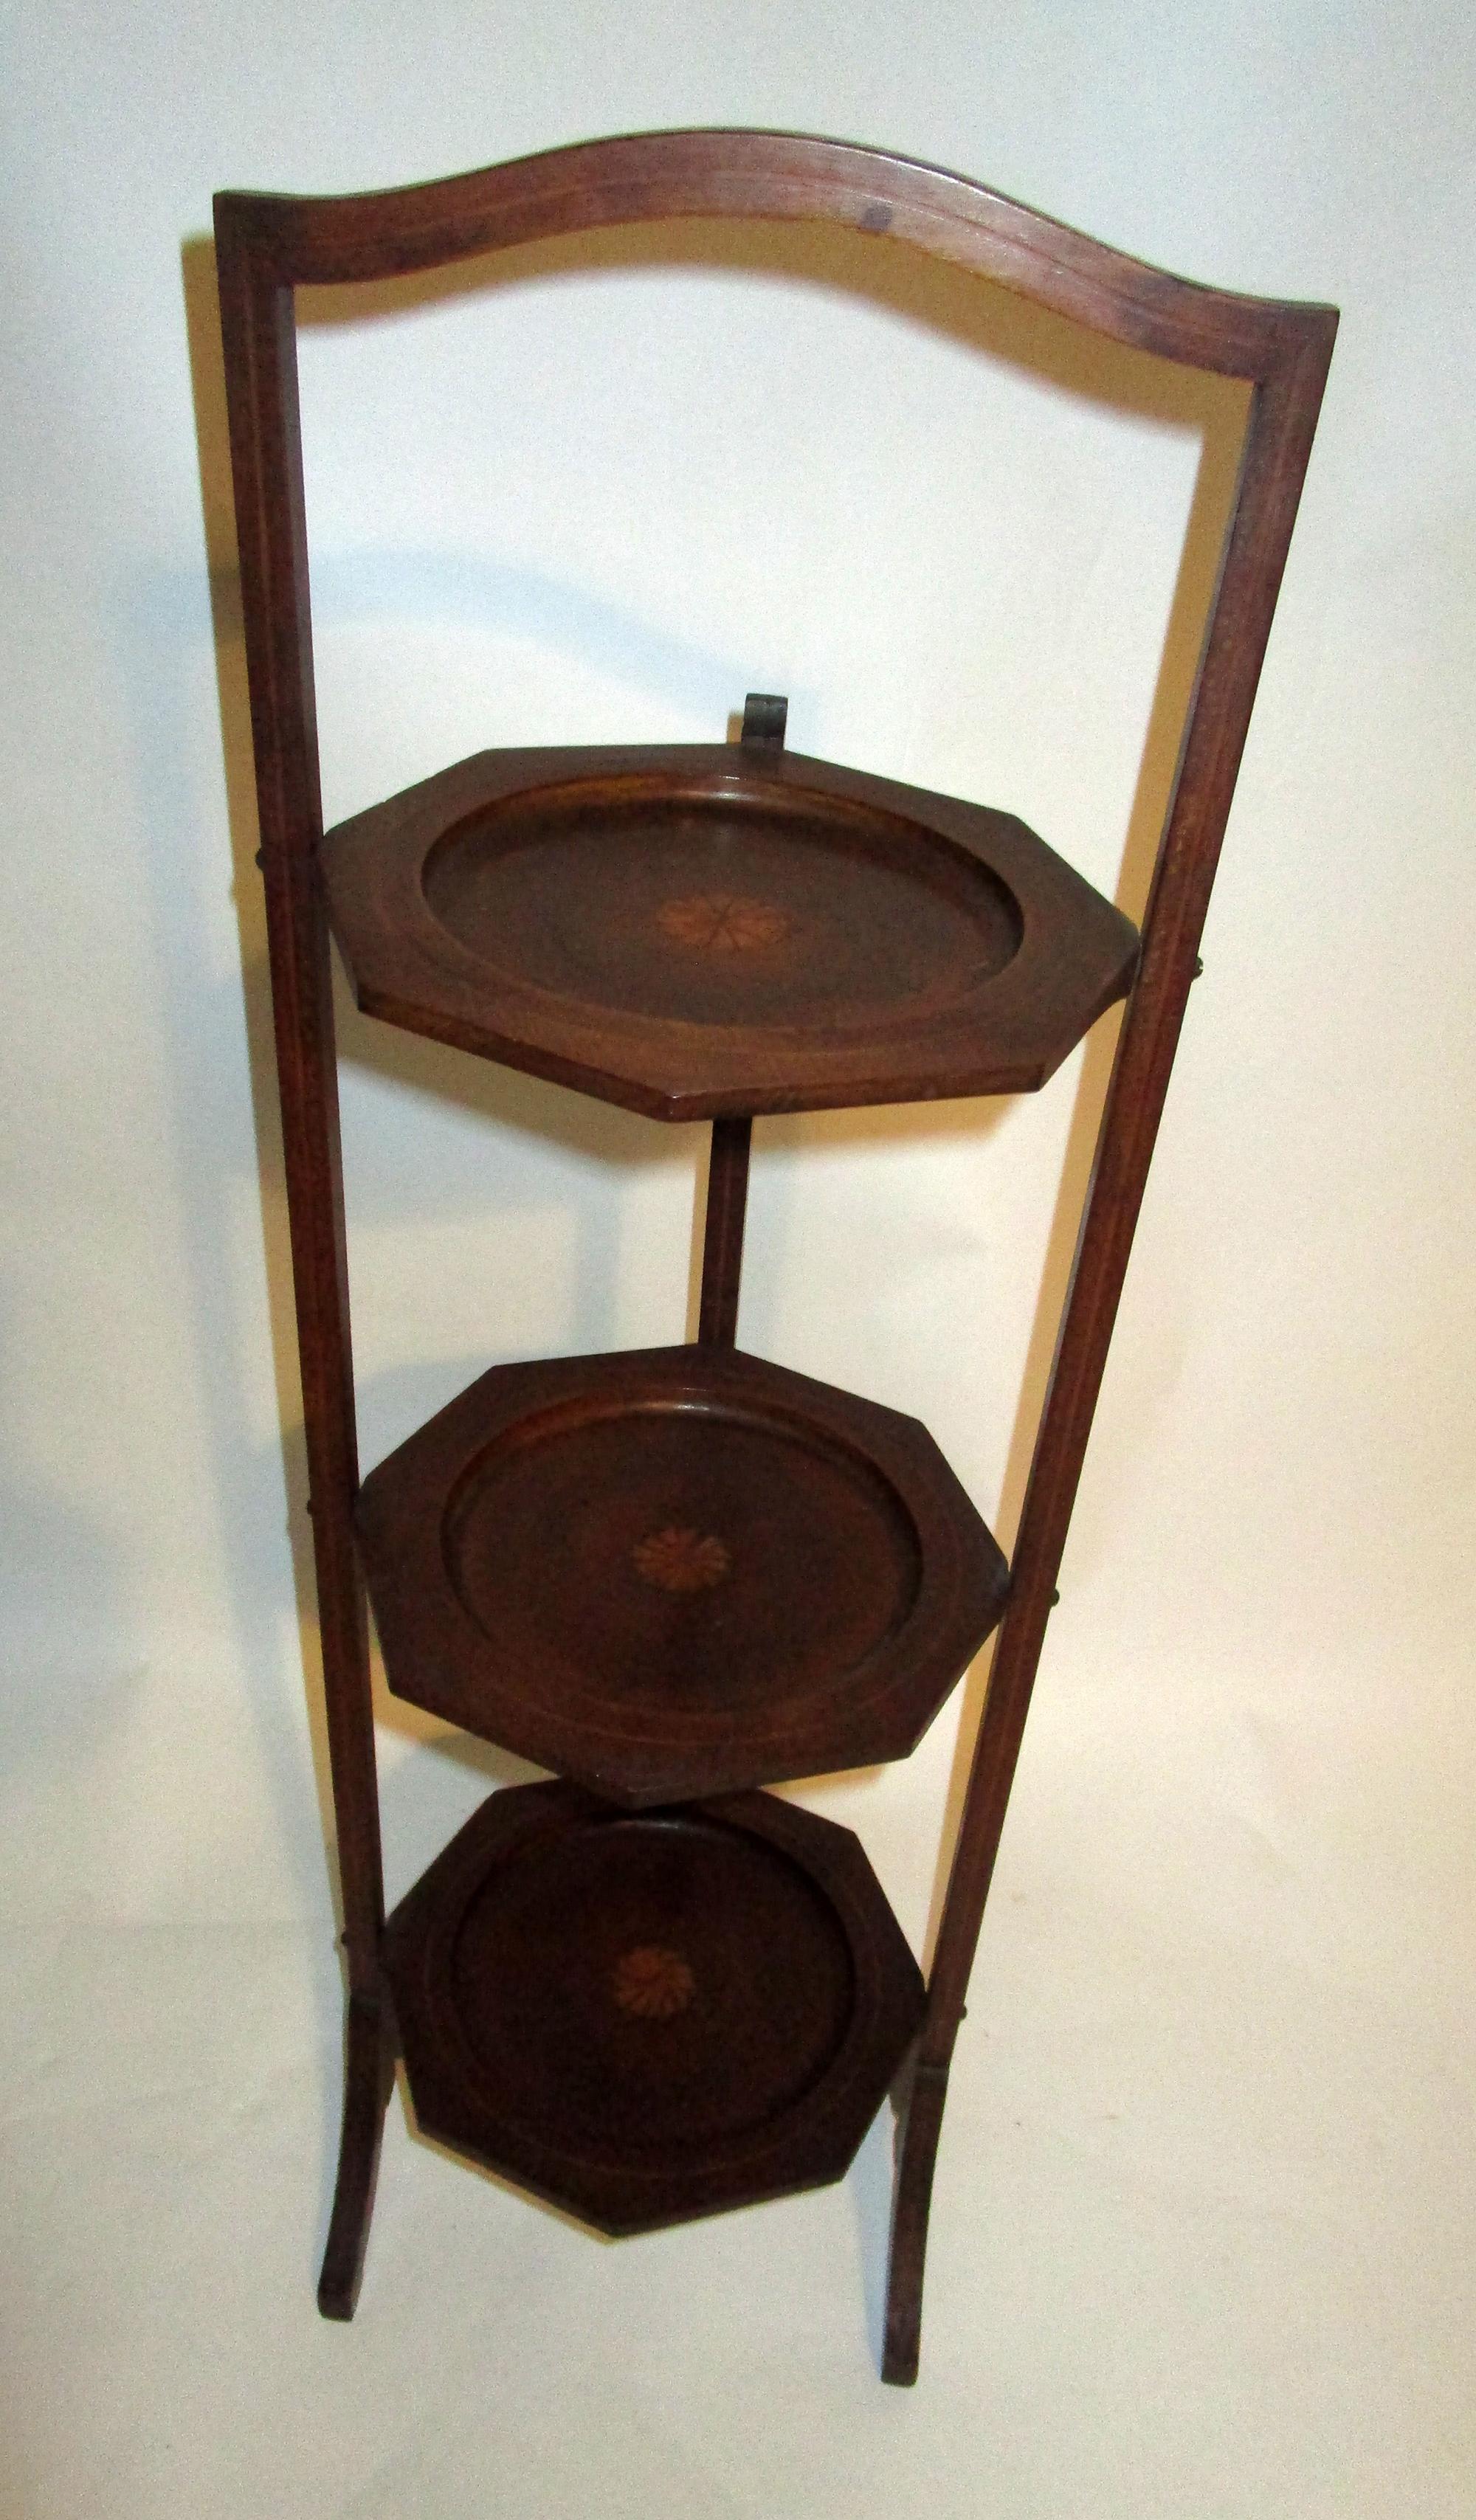 19th century Regency Mahogany Side Table or Muffin Stand 1